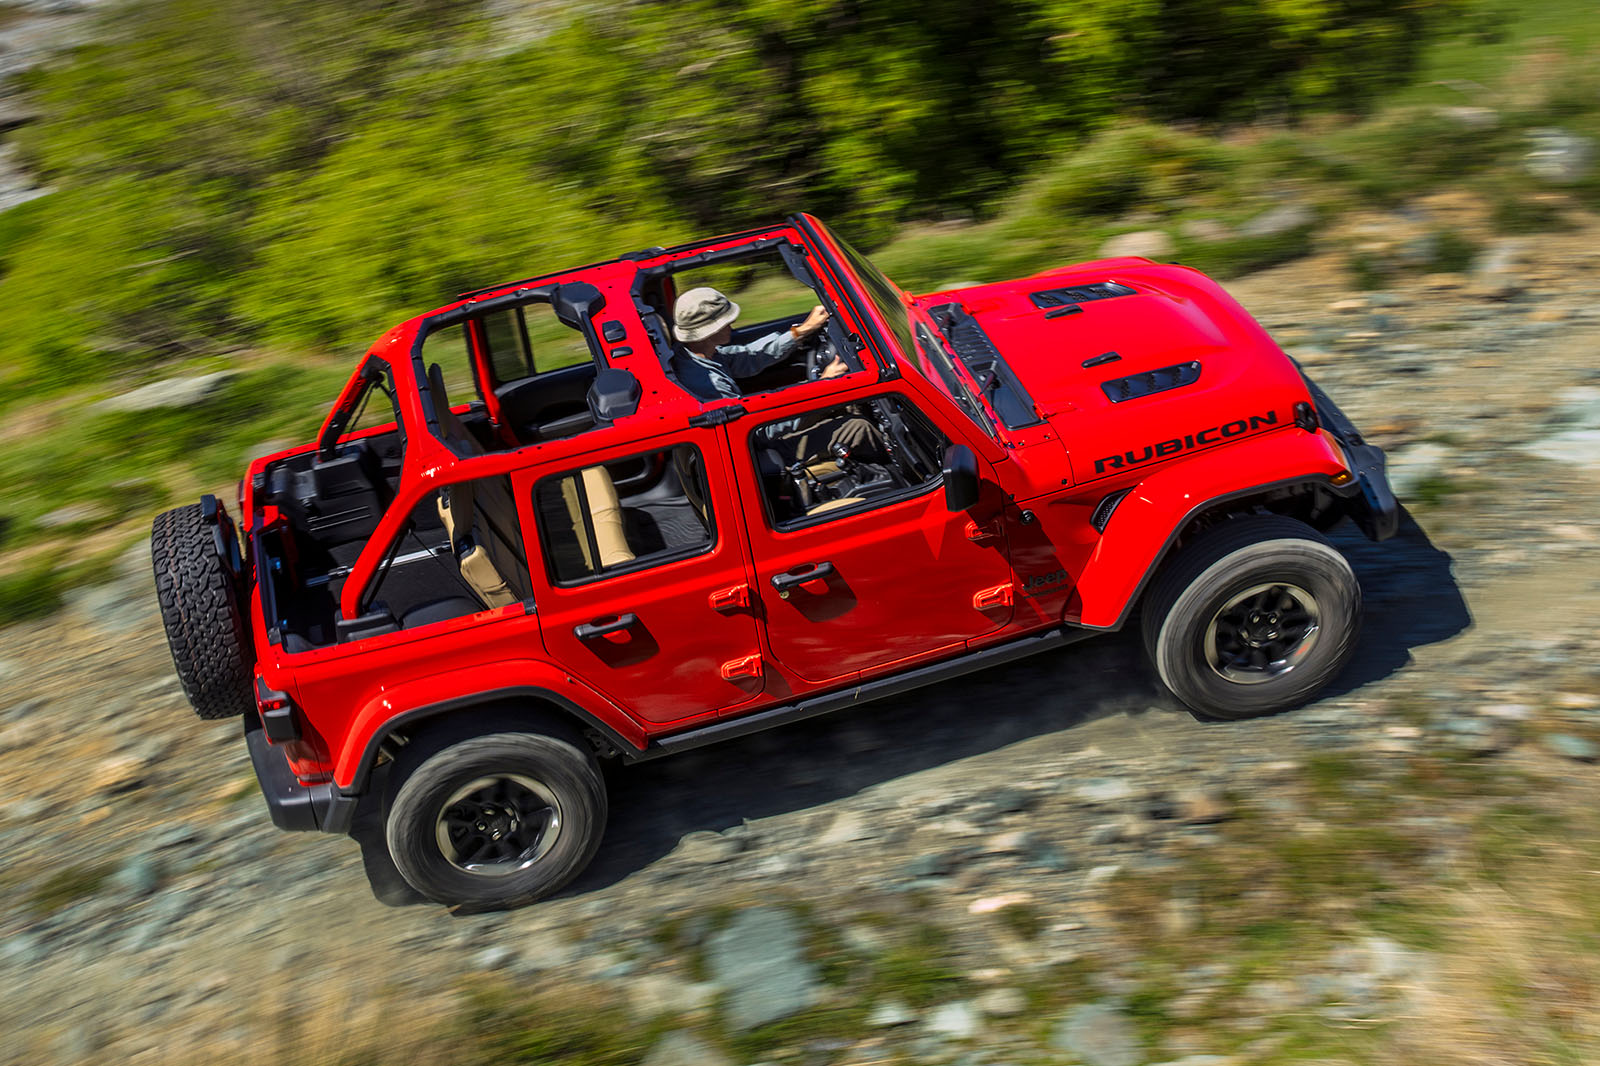 Jeep Wrangler (JL) Unlimited Rubicon 2018 review | Autocar